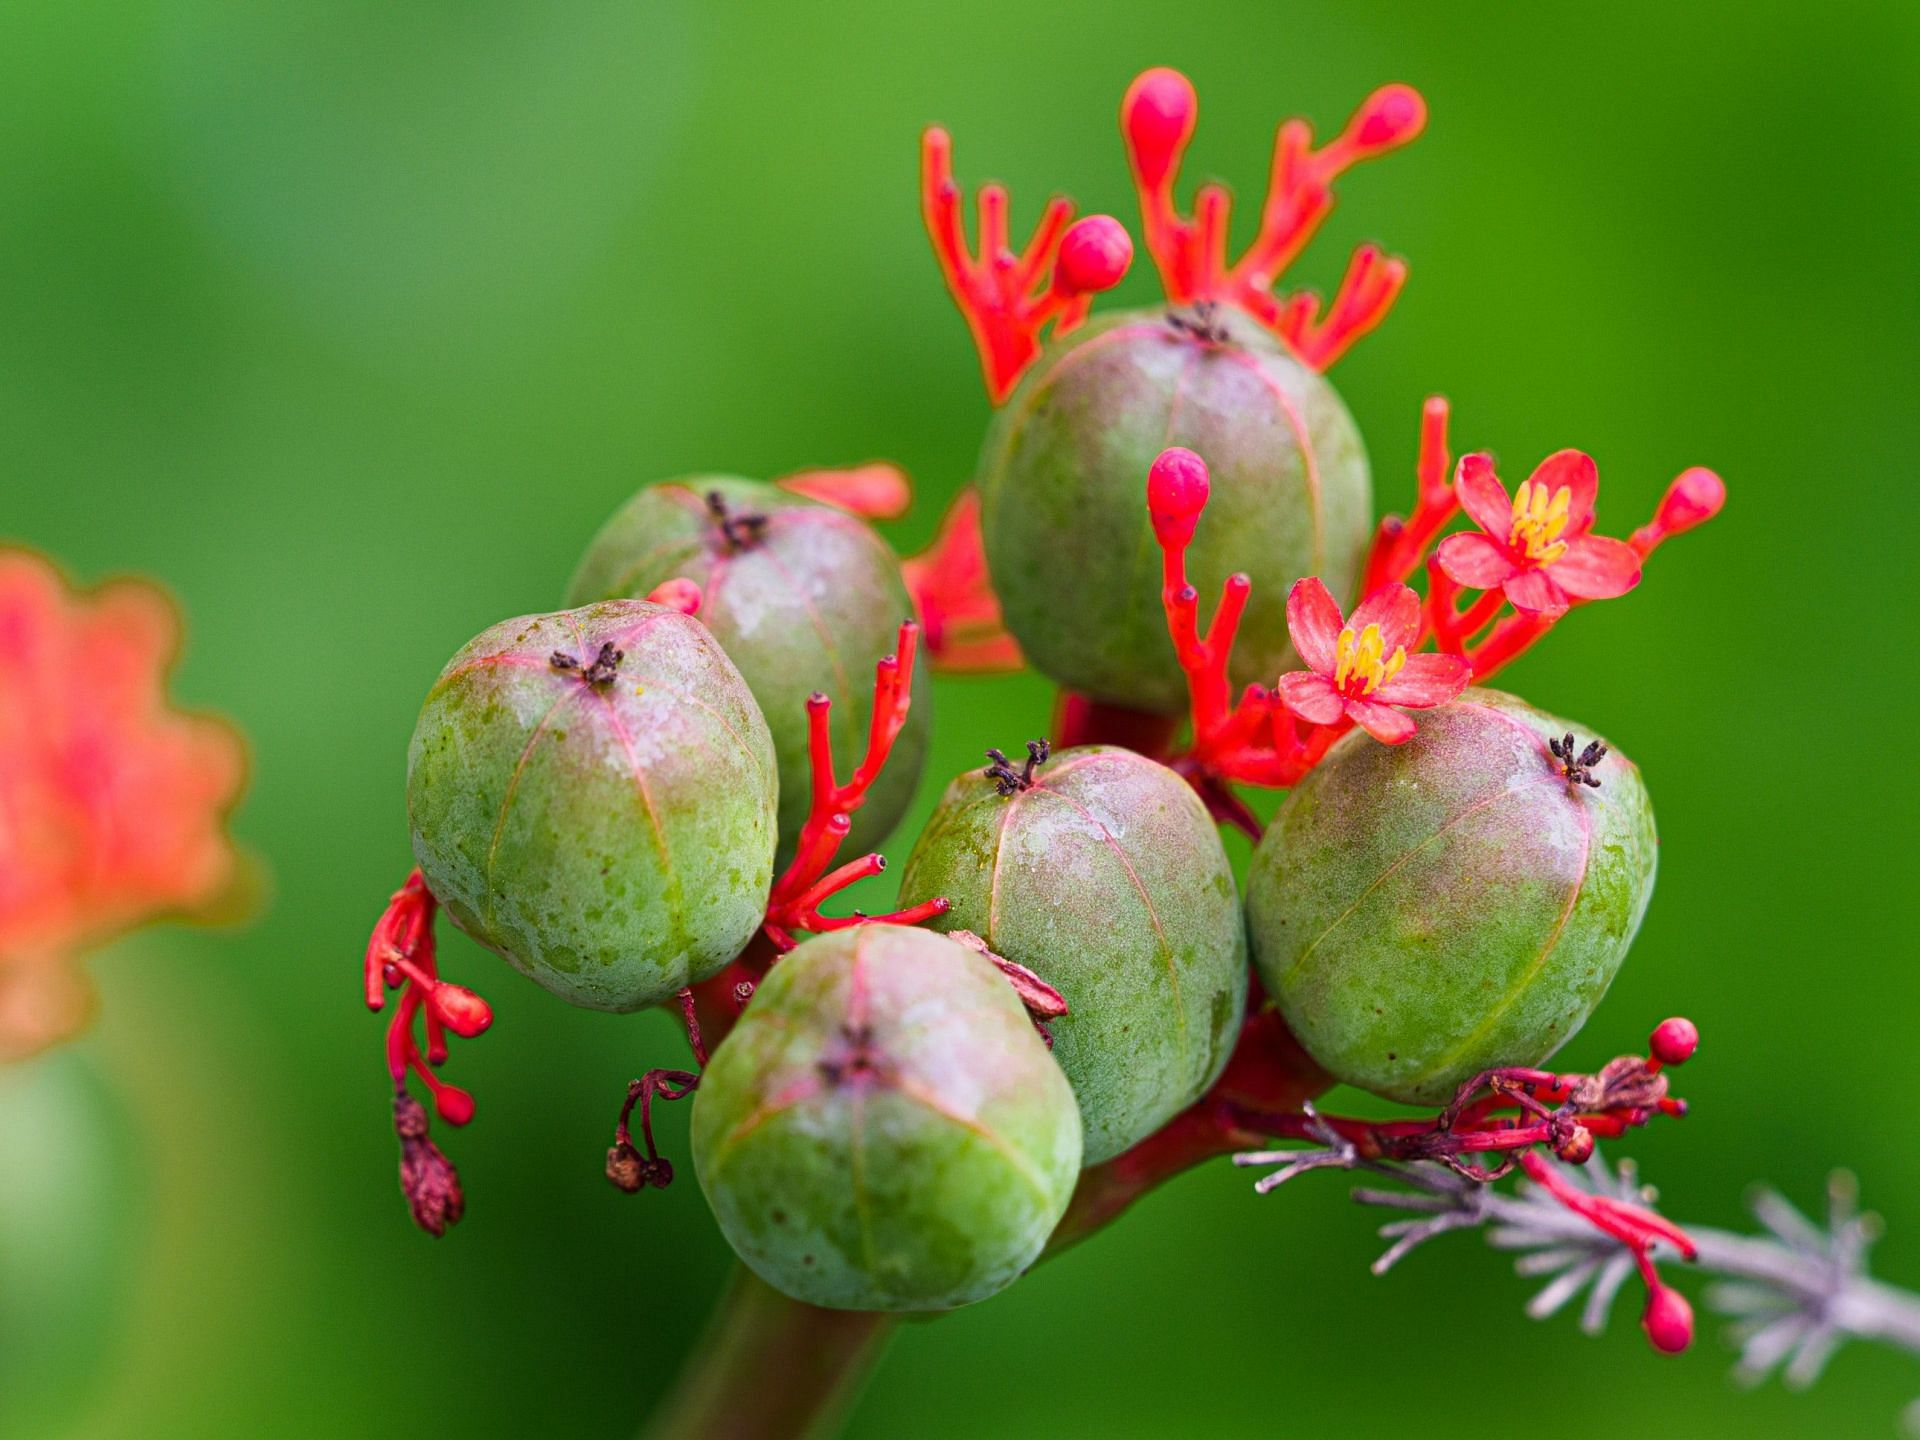 Jatropha can be considered among the most poisonous fruits. (Image via Pexels/Dirk Schuneman)